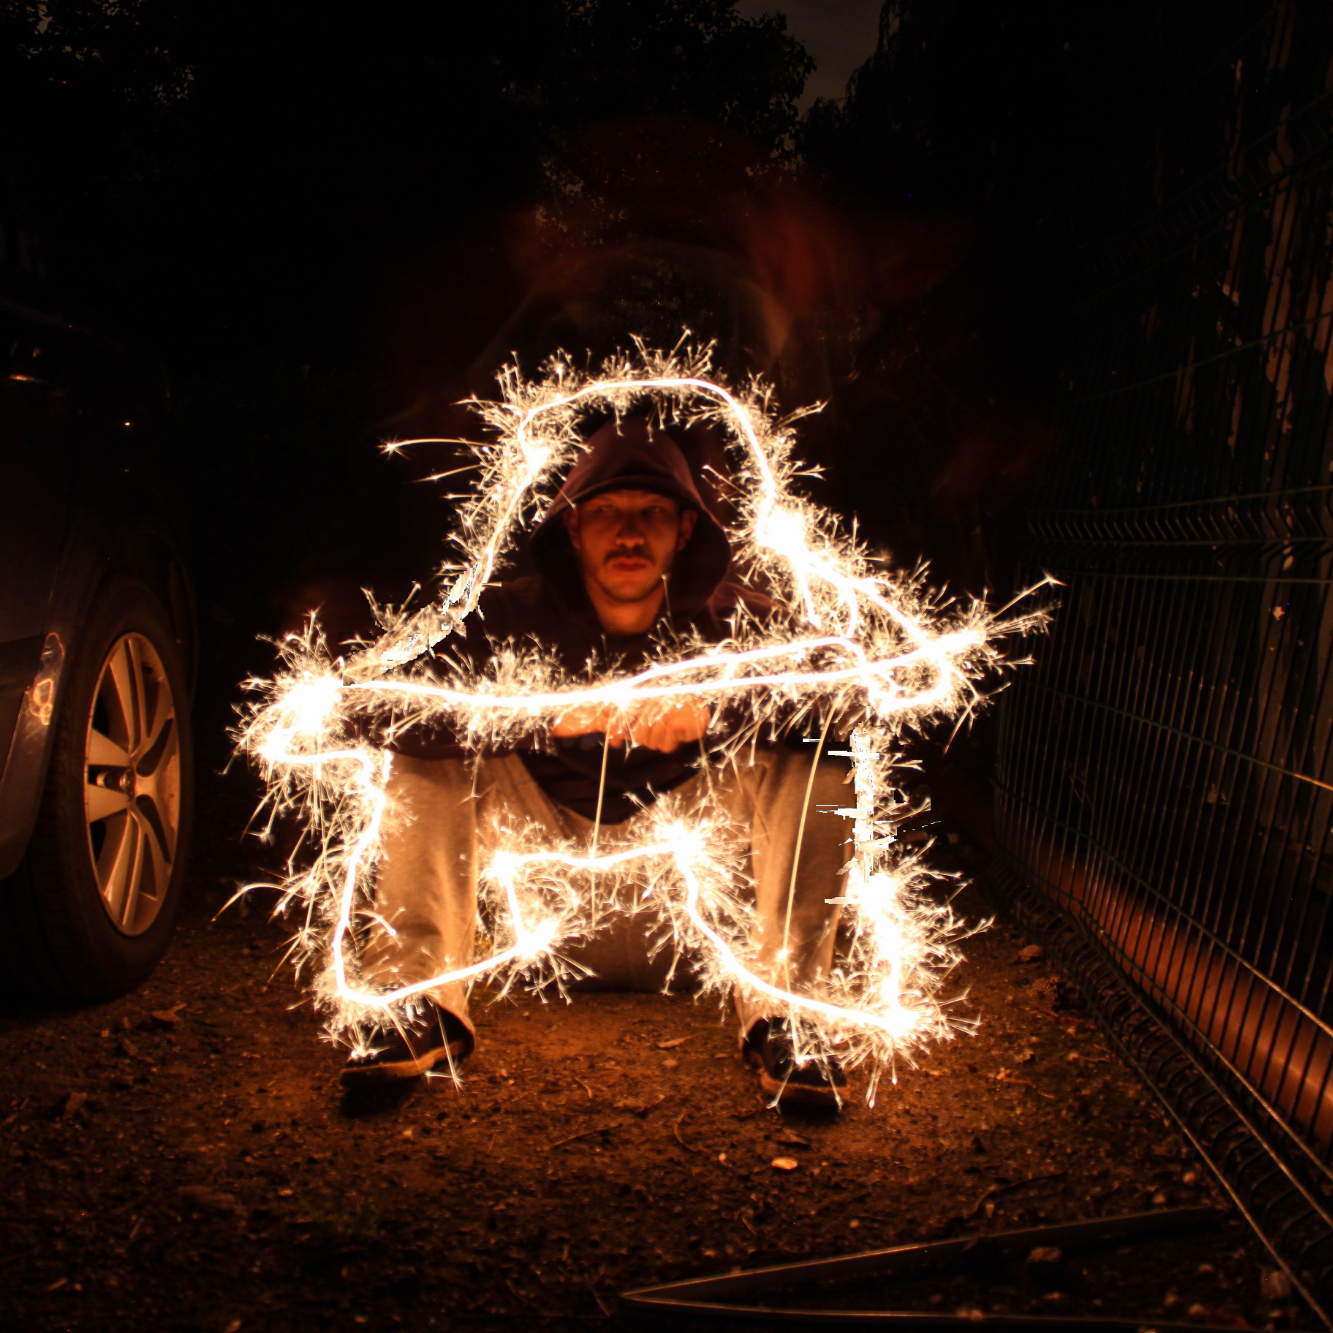 photographer making a steel wool picture in the dark